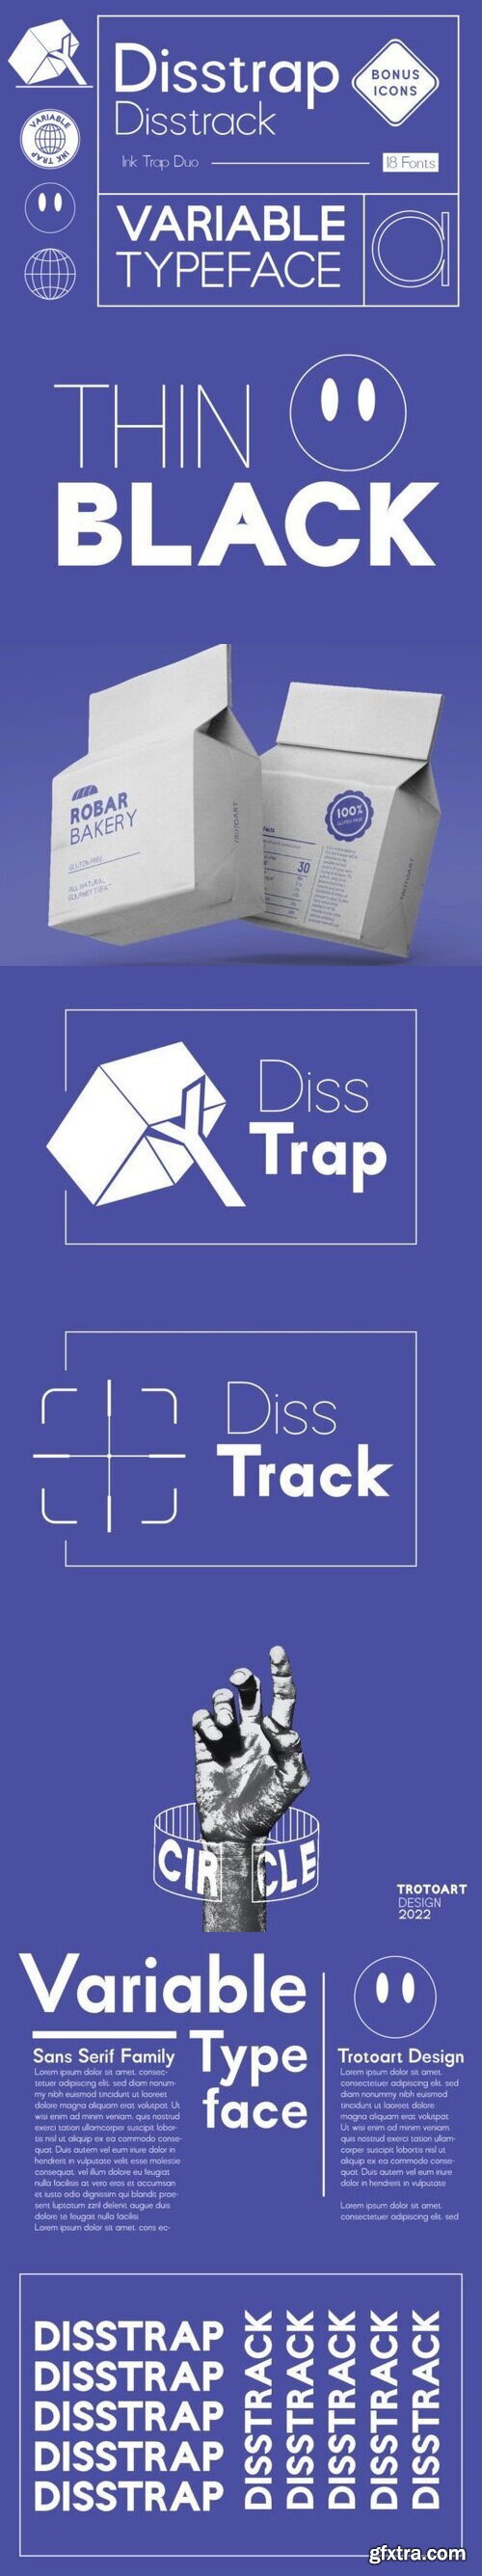 Disstrap and Disstrack Font